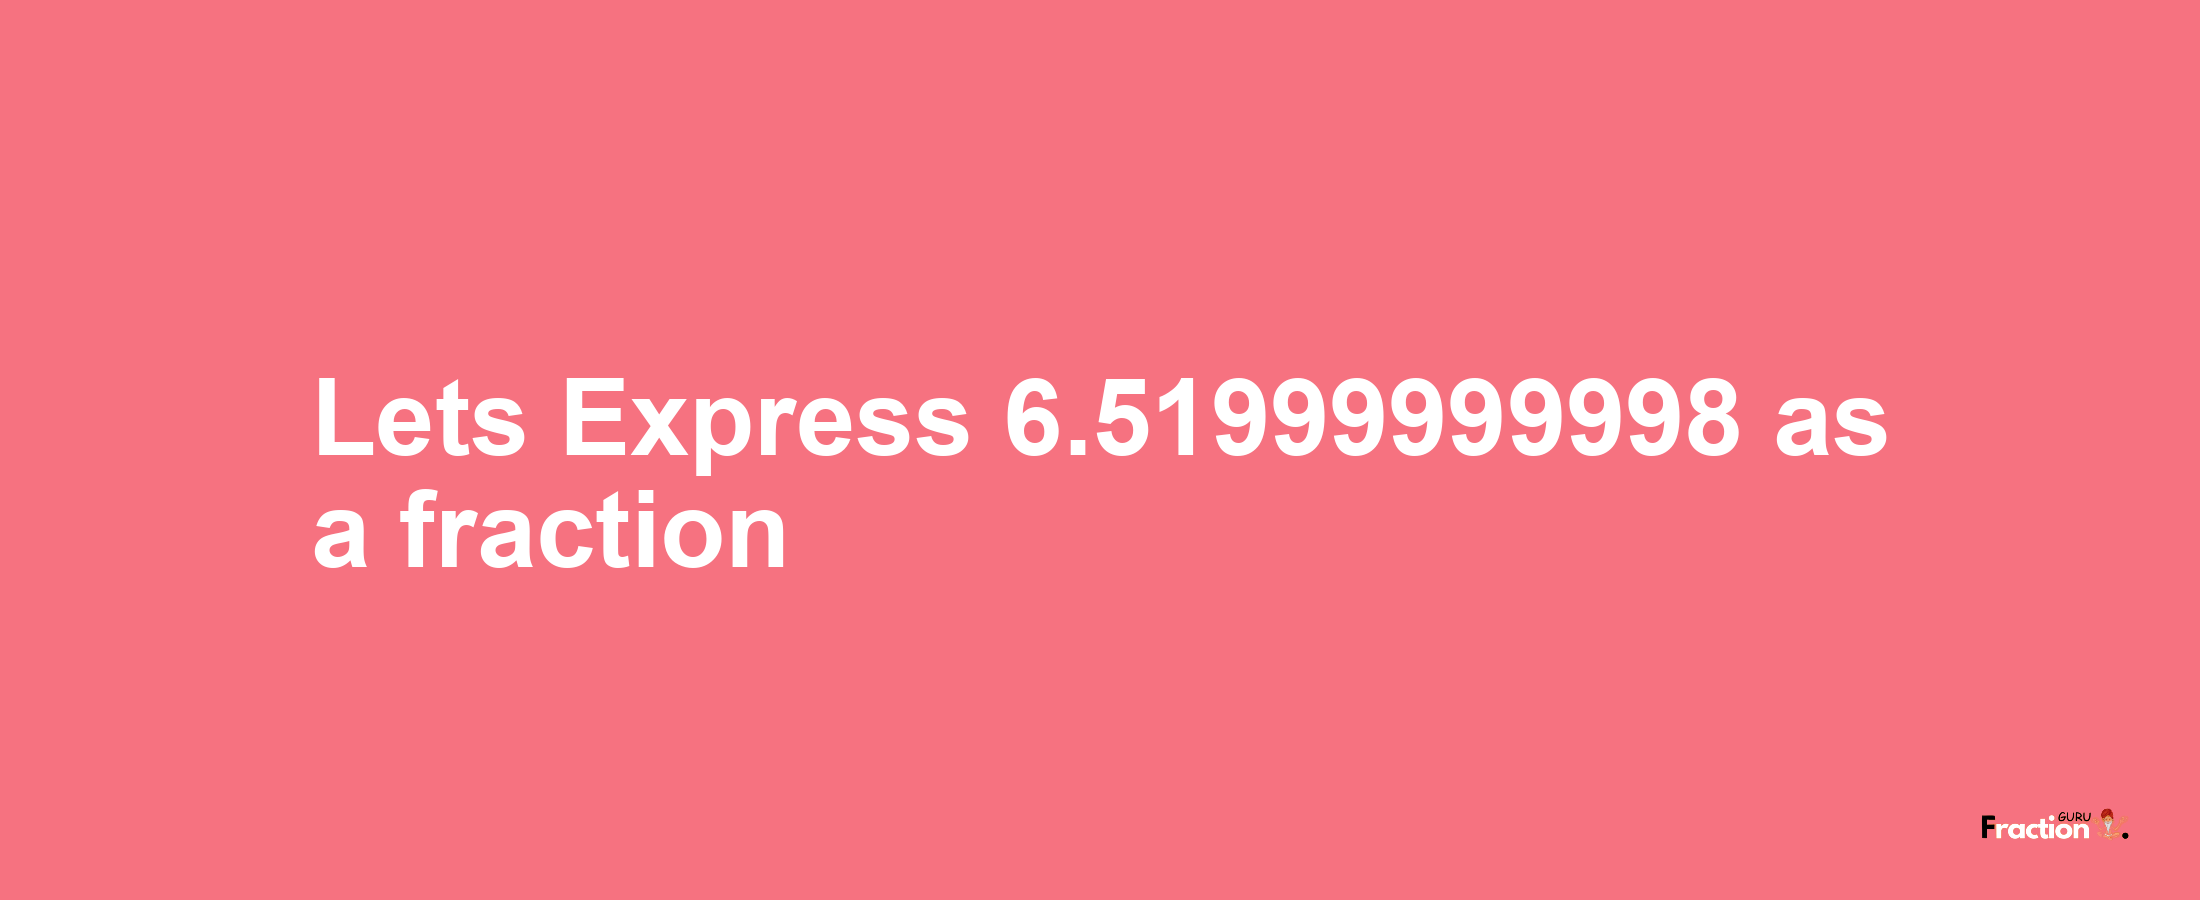 Lets Express 6.51999999998 as afraction